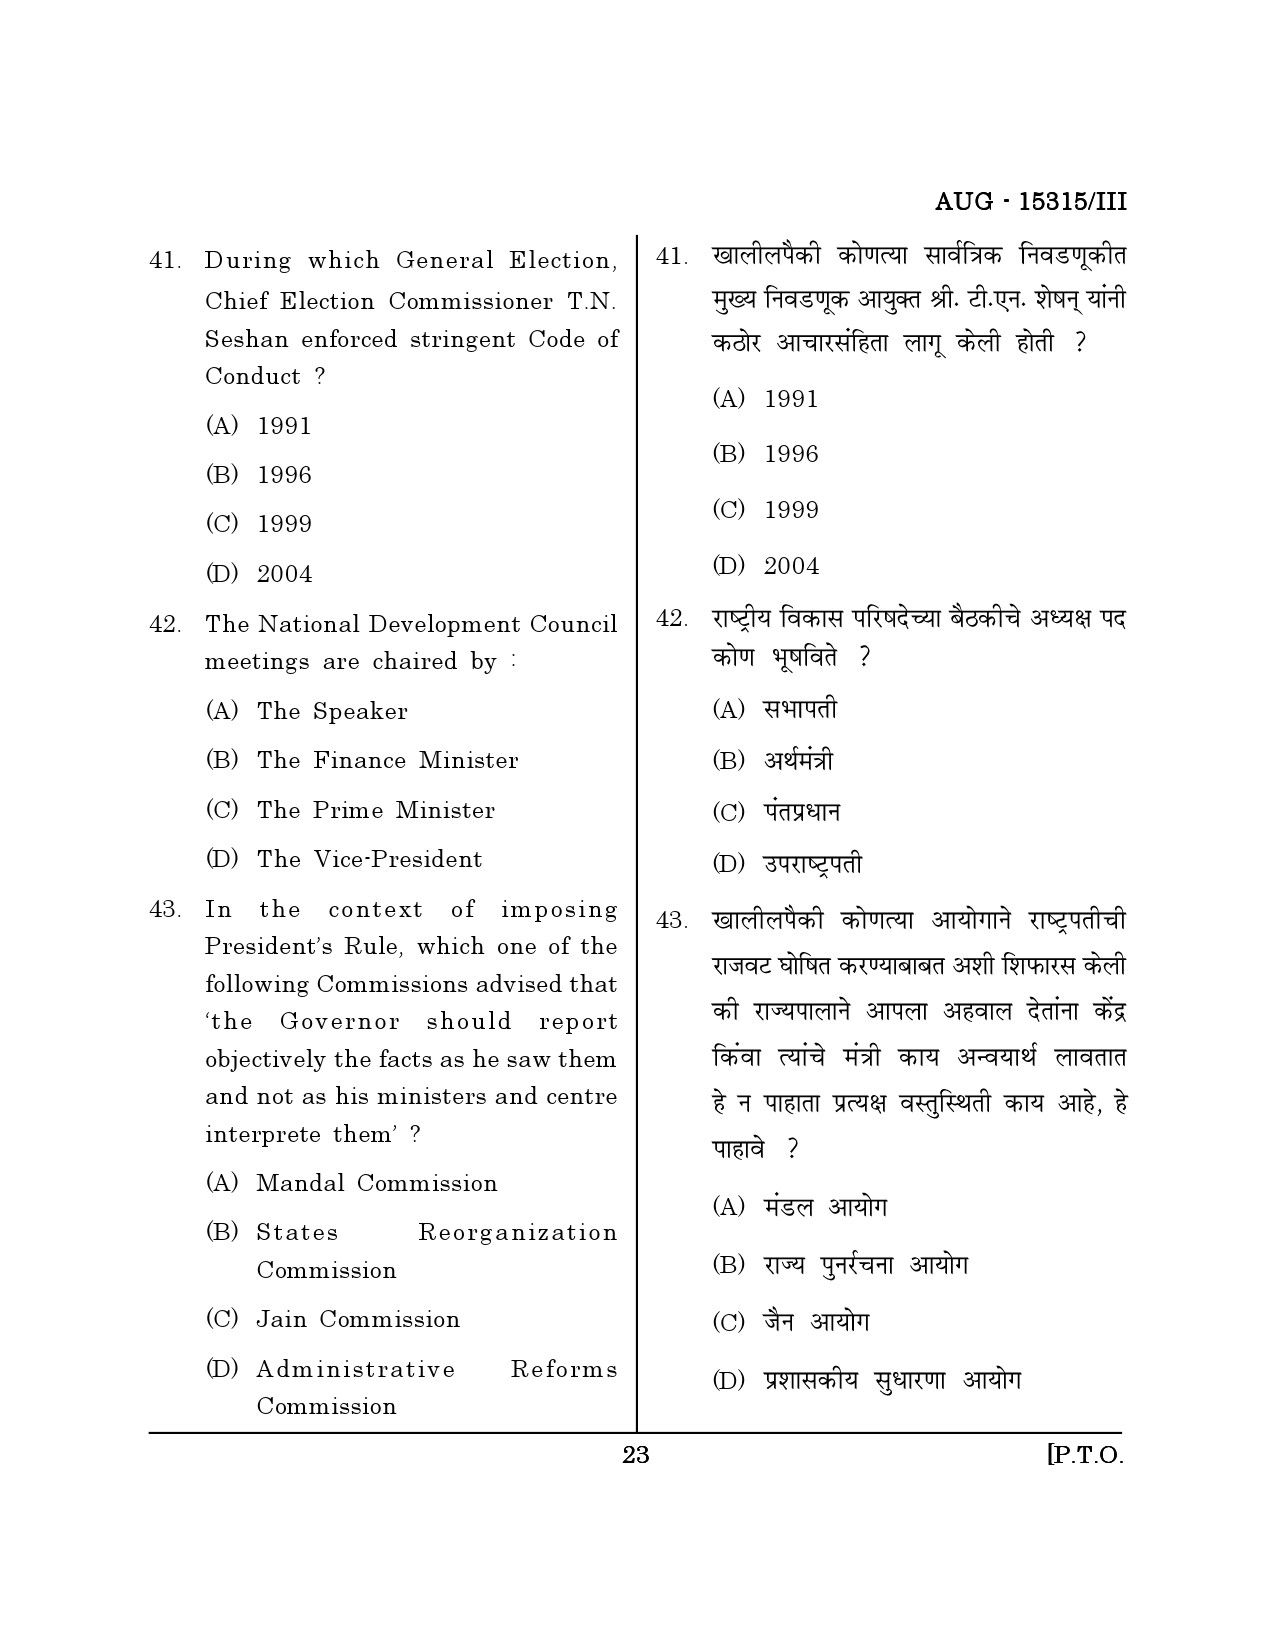 Maharashtra SET Political Science Question Paper III August 2015 22